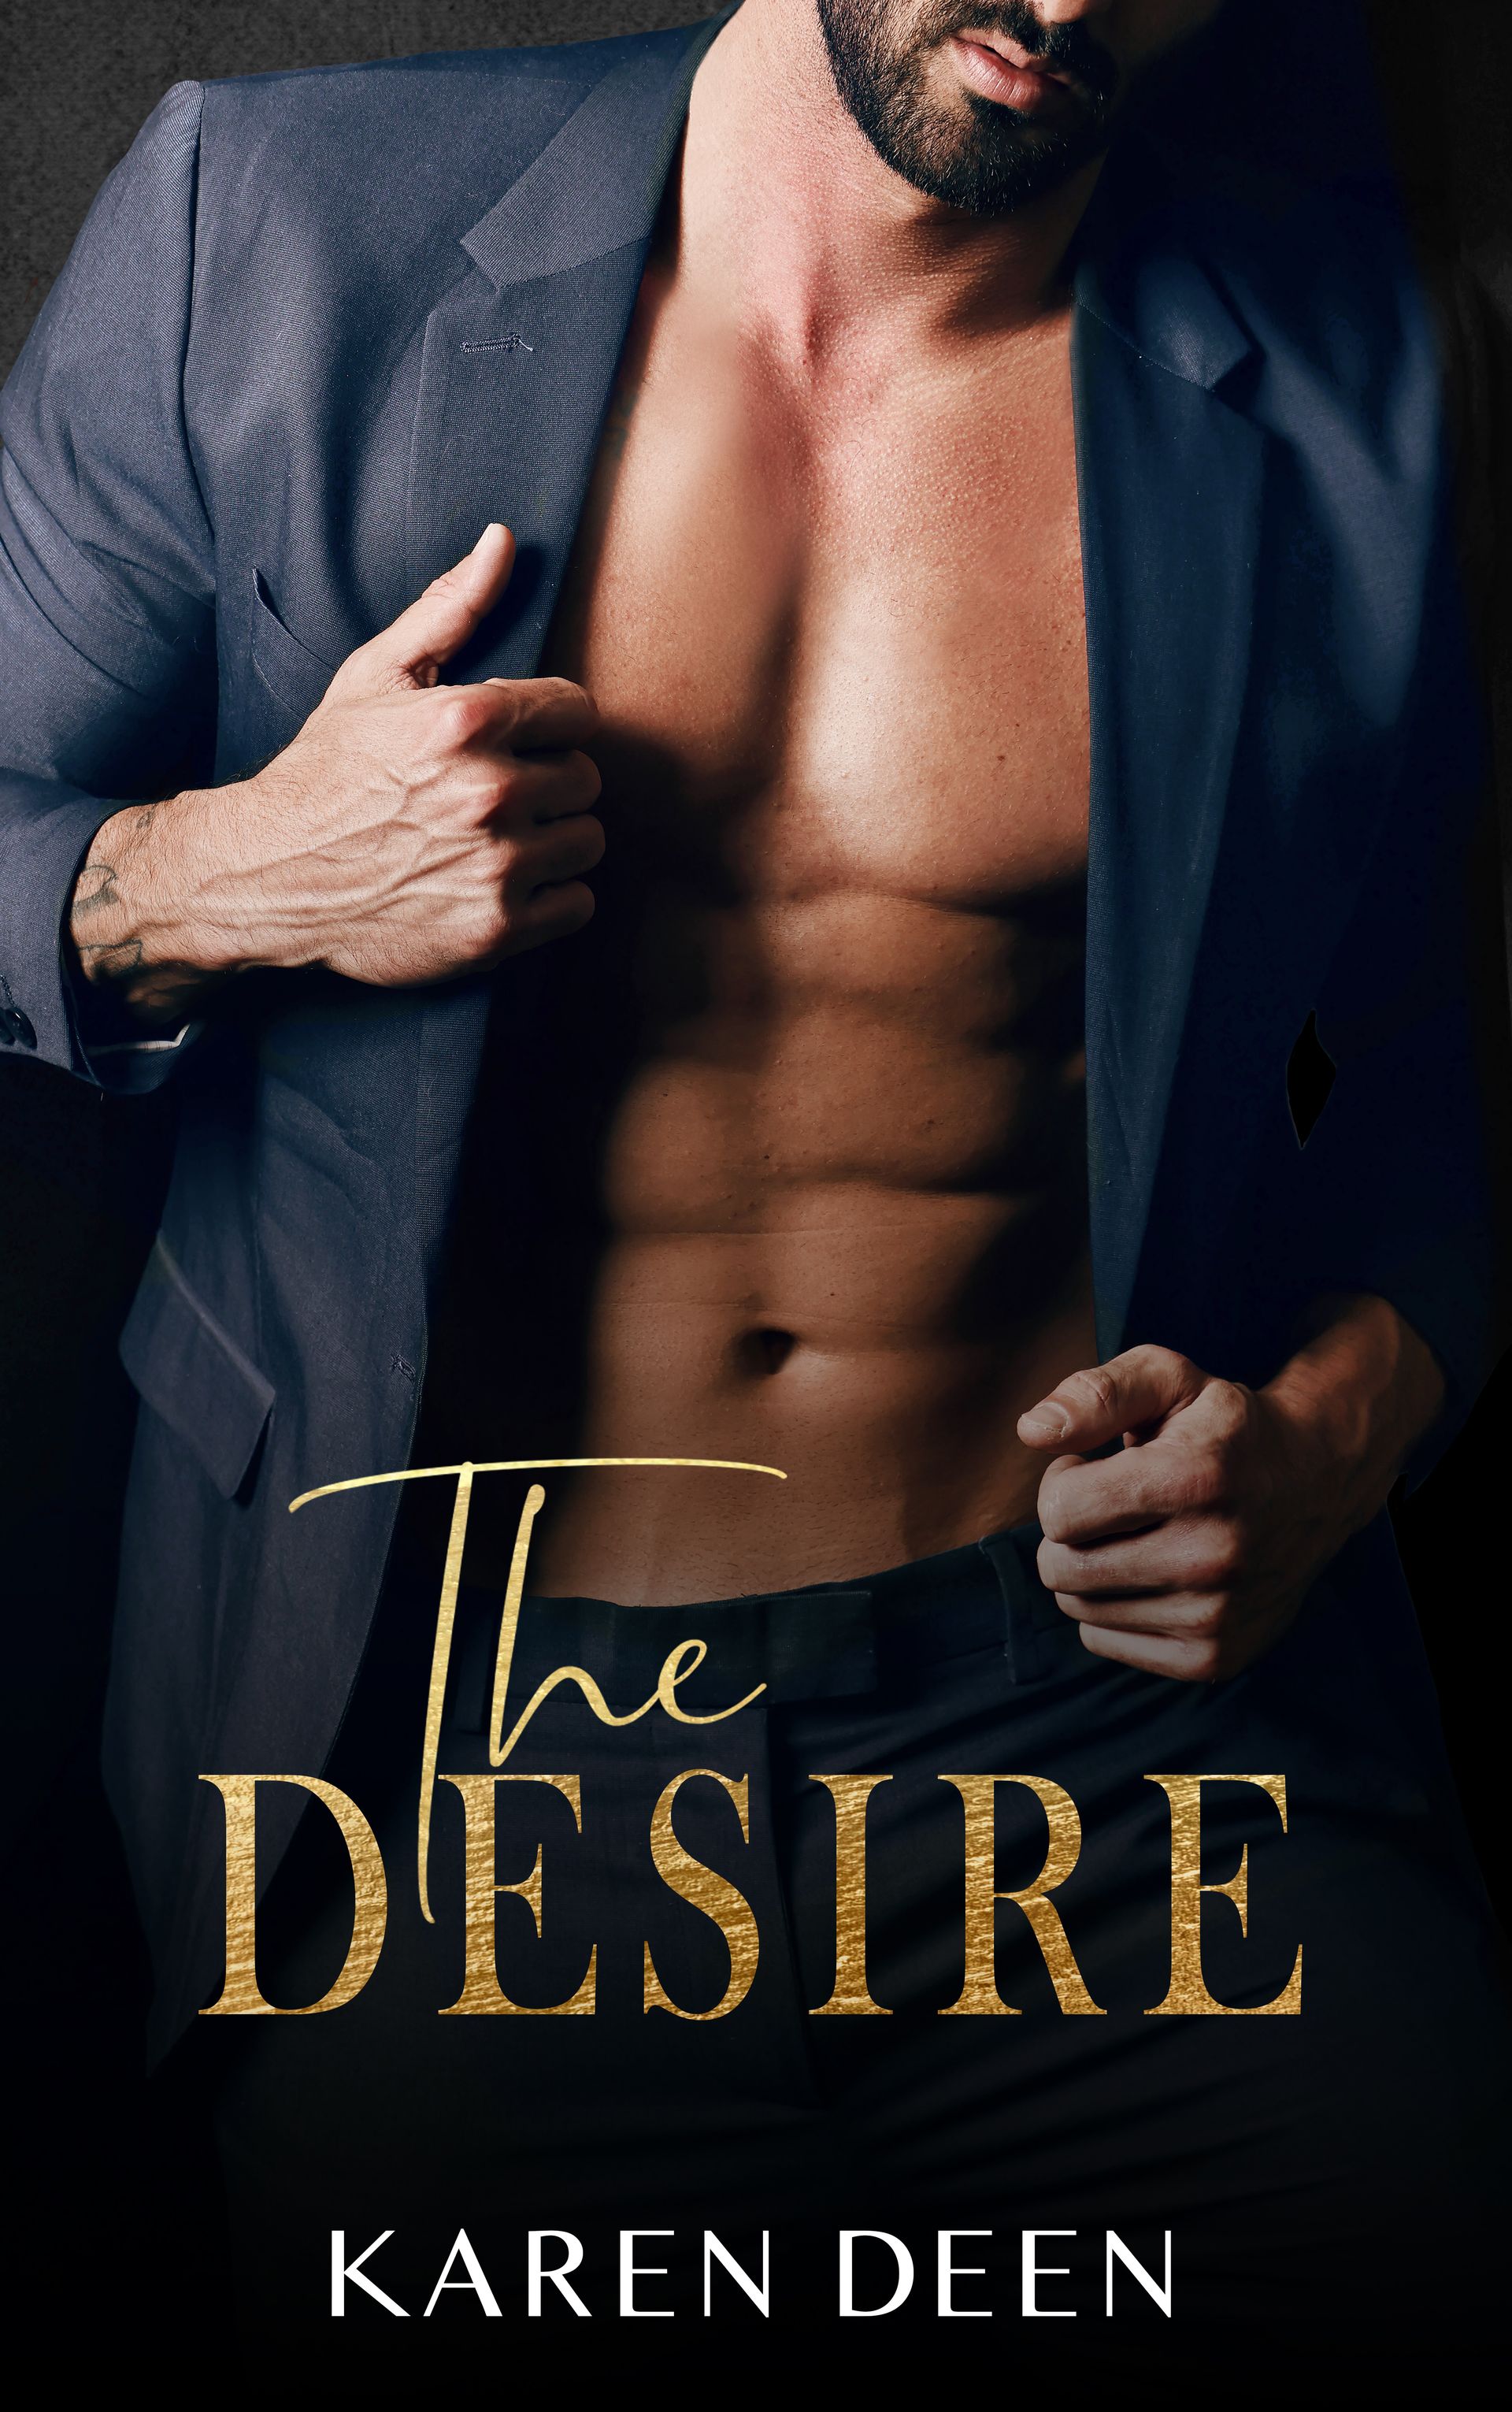 A shirtless man in a suit is on the cover of the book The Desire by Karen Deen.